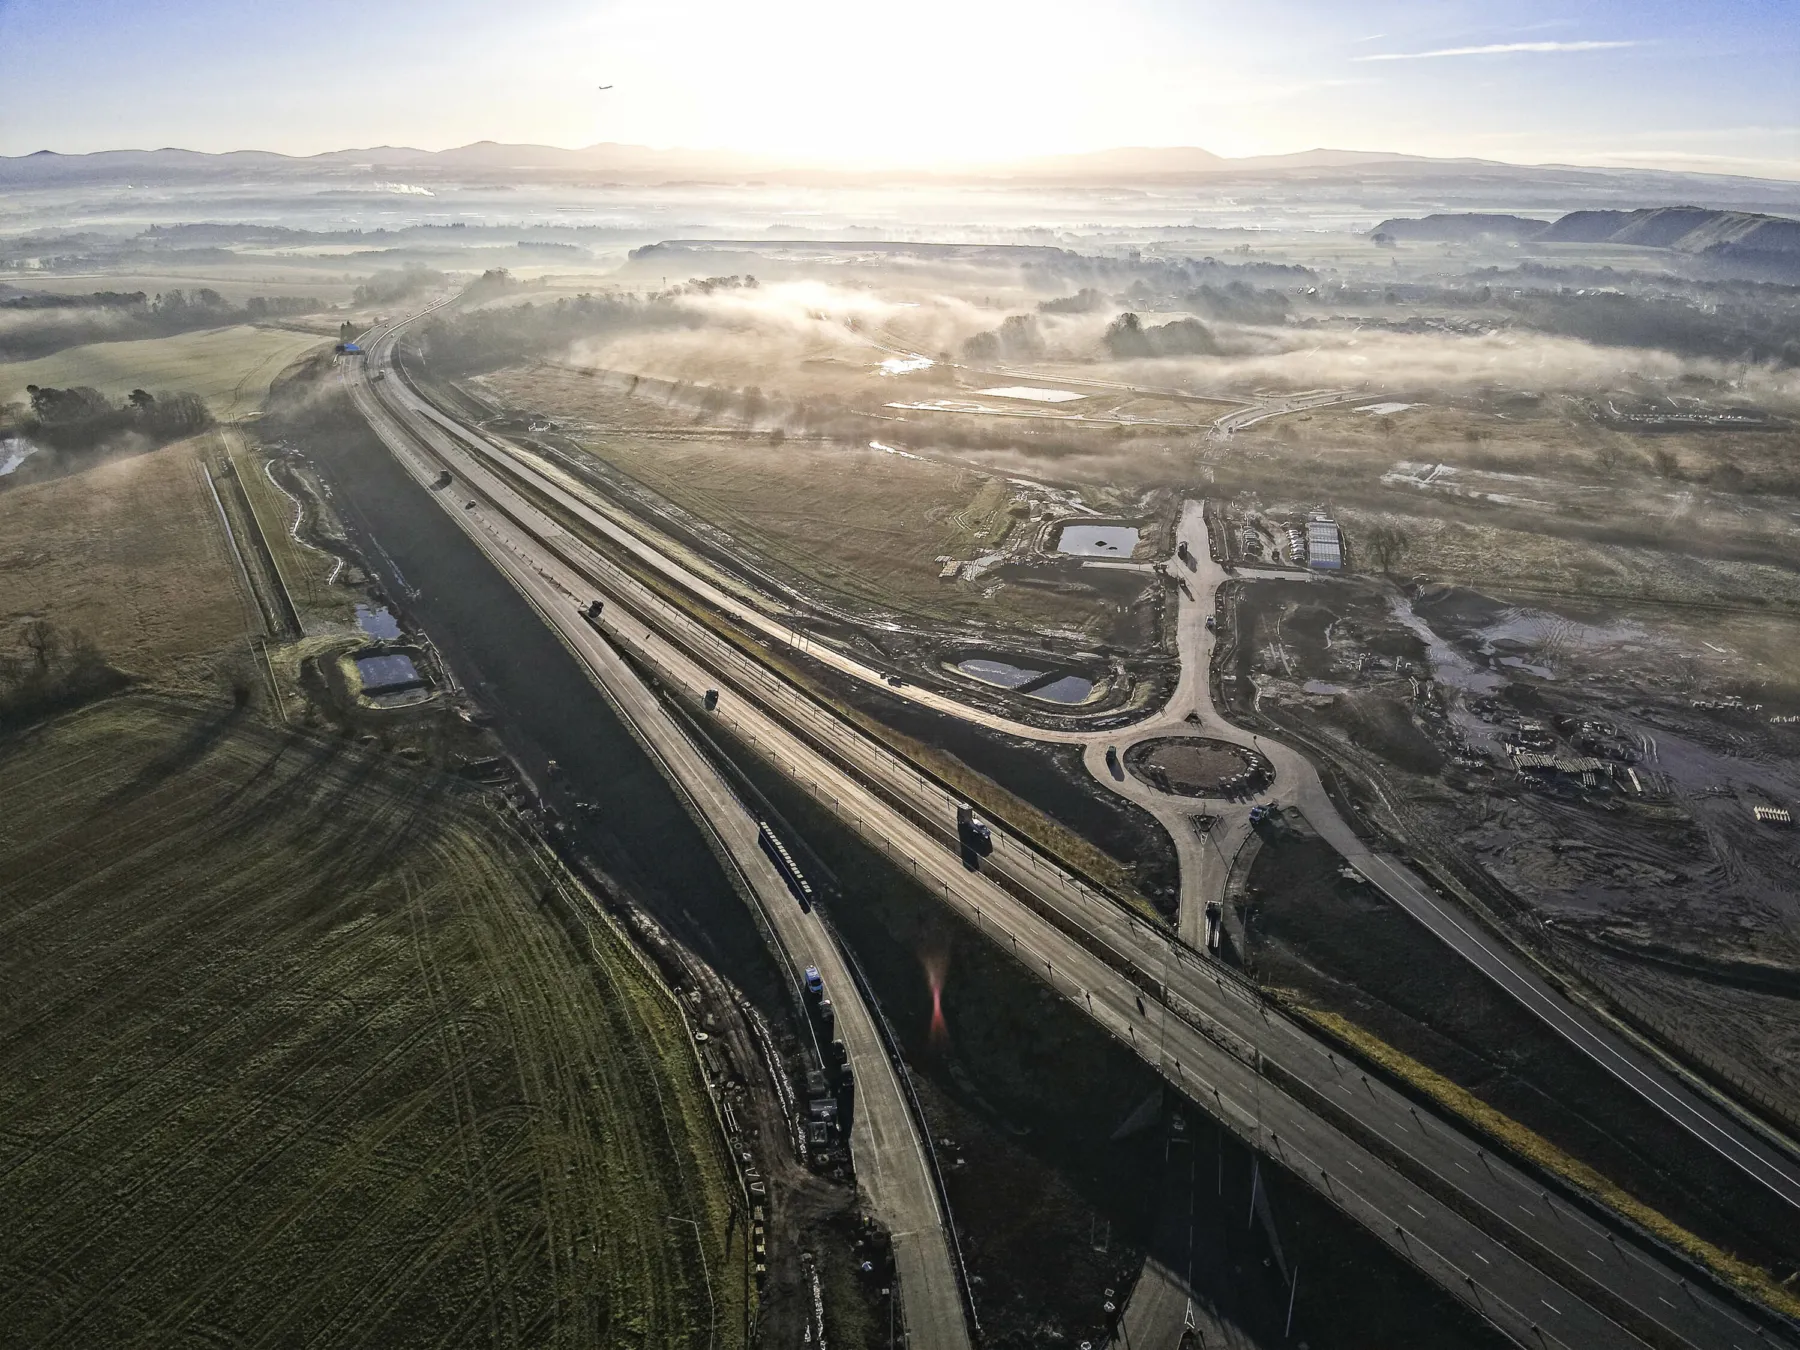 Aerial view of new junction on the M9 at Winchburgh. Early morning mist is settling on the fields surrounding the works. A new roundabout sits behind the motorway. Part of the documentation used by Thomson Gray Construction Consultants during the project.